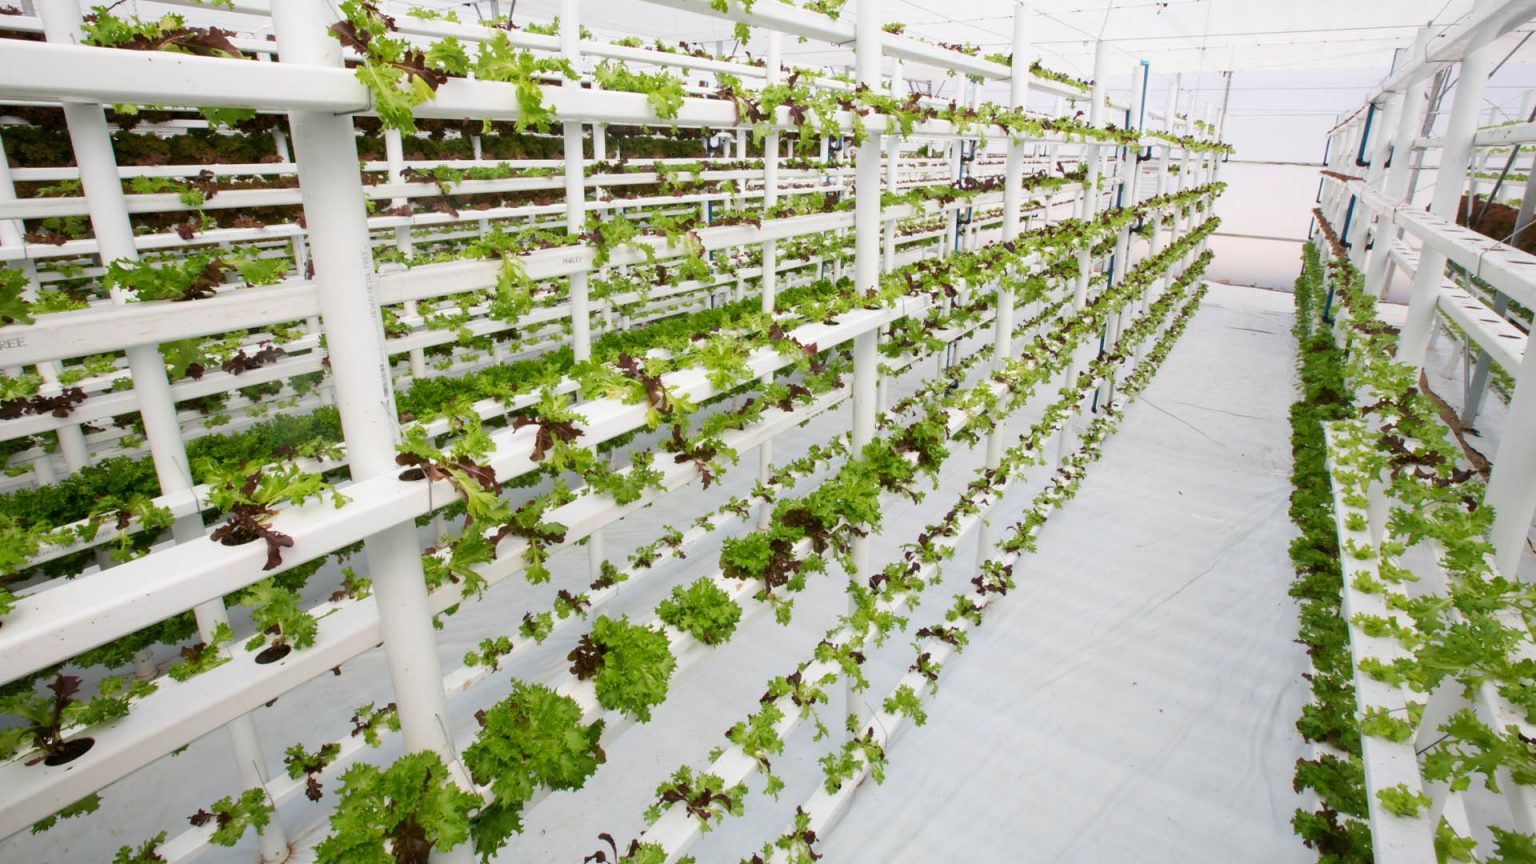 Vertical farming market is projected to reach $12.04bn